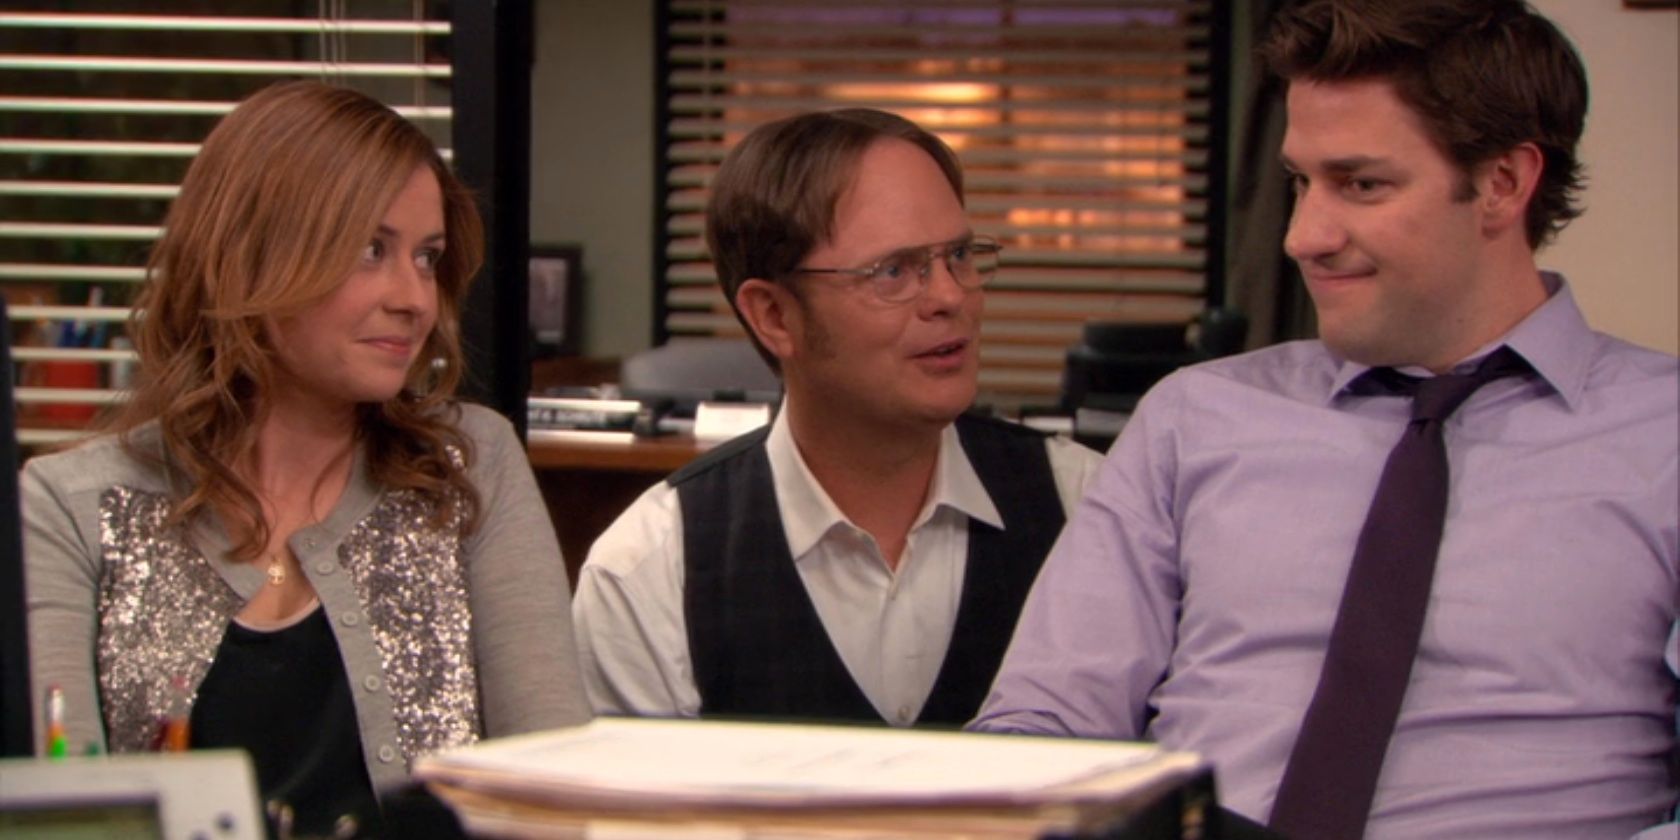 The Office: The 10 Best Episodes (According to IMDb)